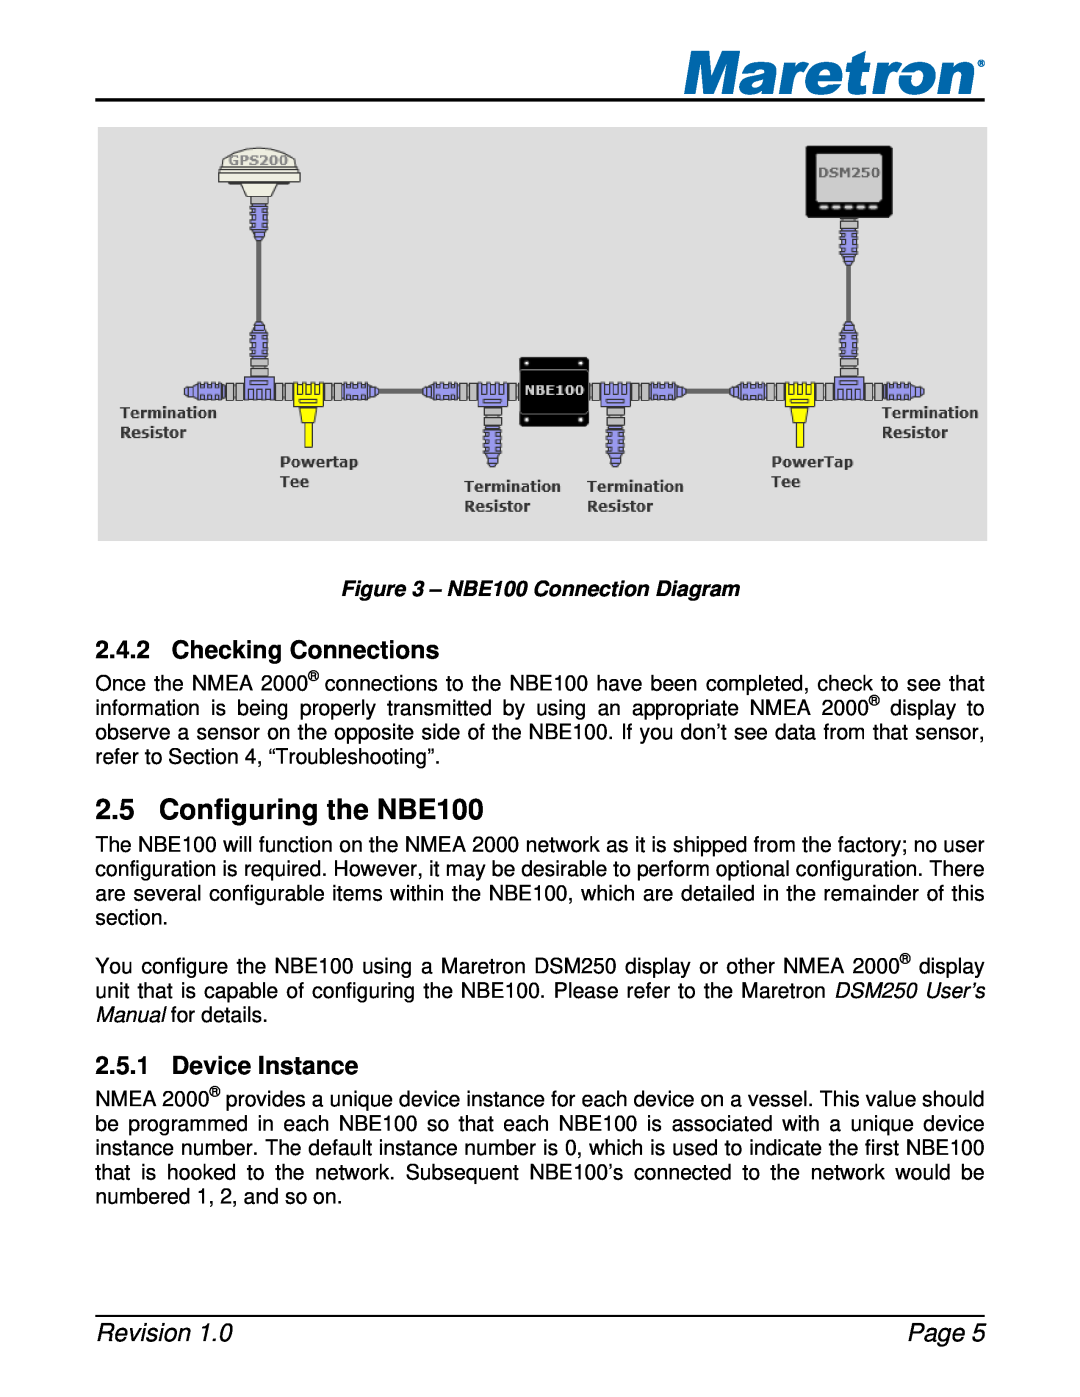 Maretron Configuring the NBE100, Checking Connections, Device Instance, NBE100 Connection Diagram, Revision, Page 